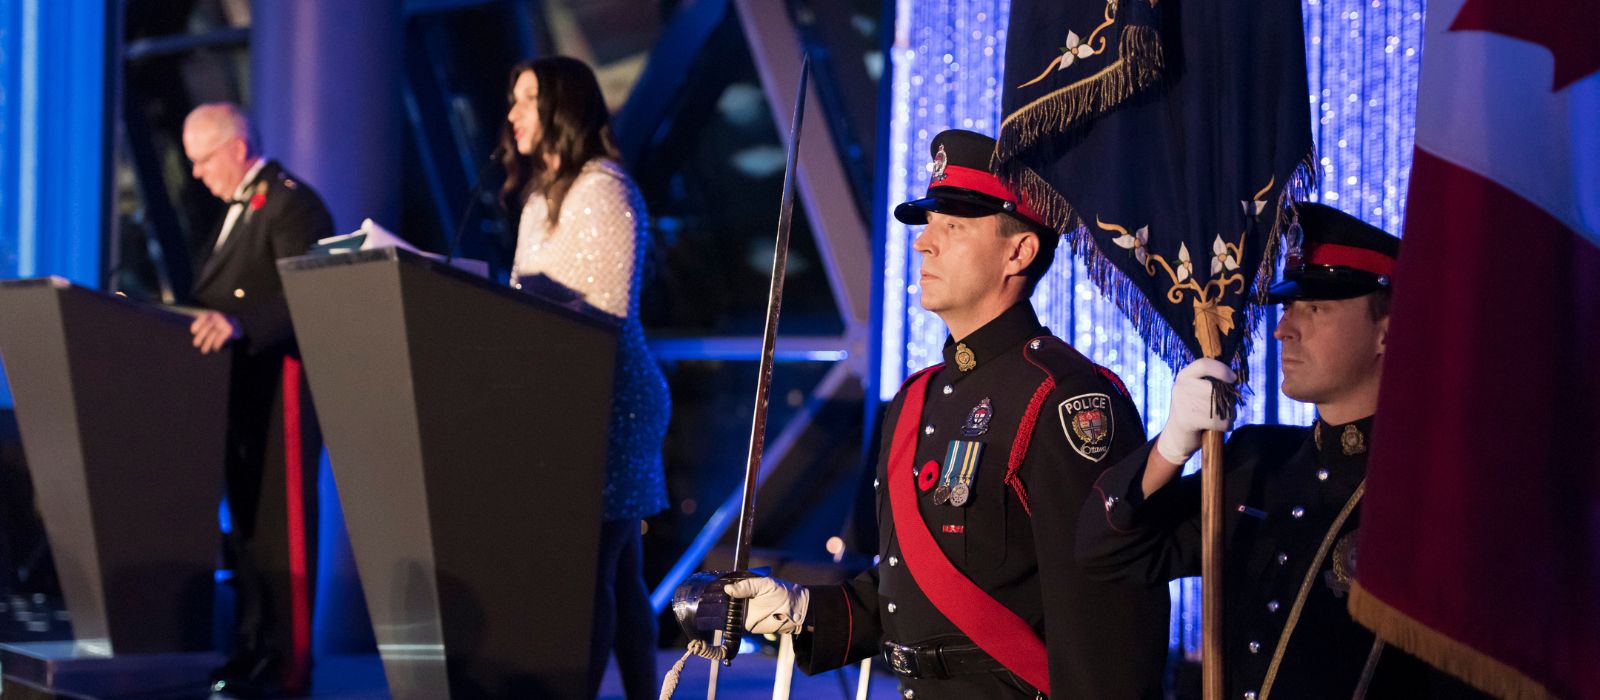 Stage at the Ottawa Police Gala with OPS members in formal uniforms and speakers.